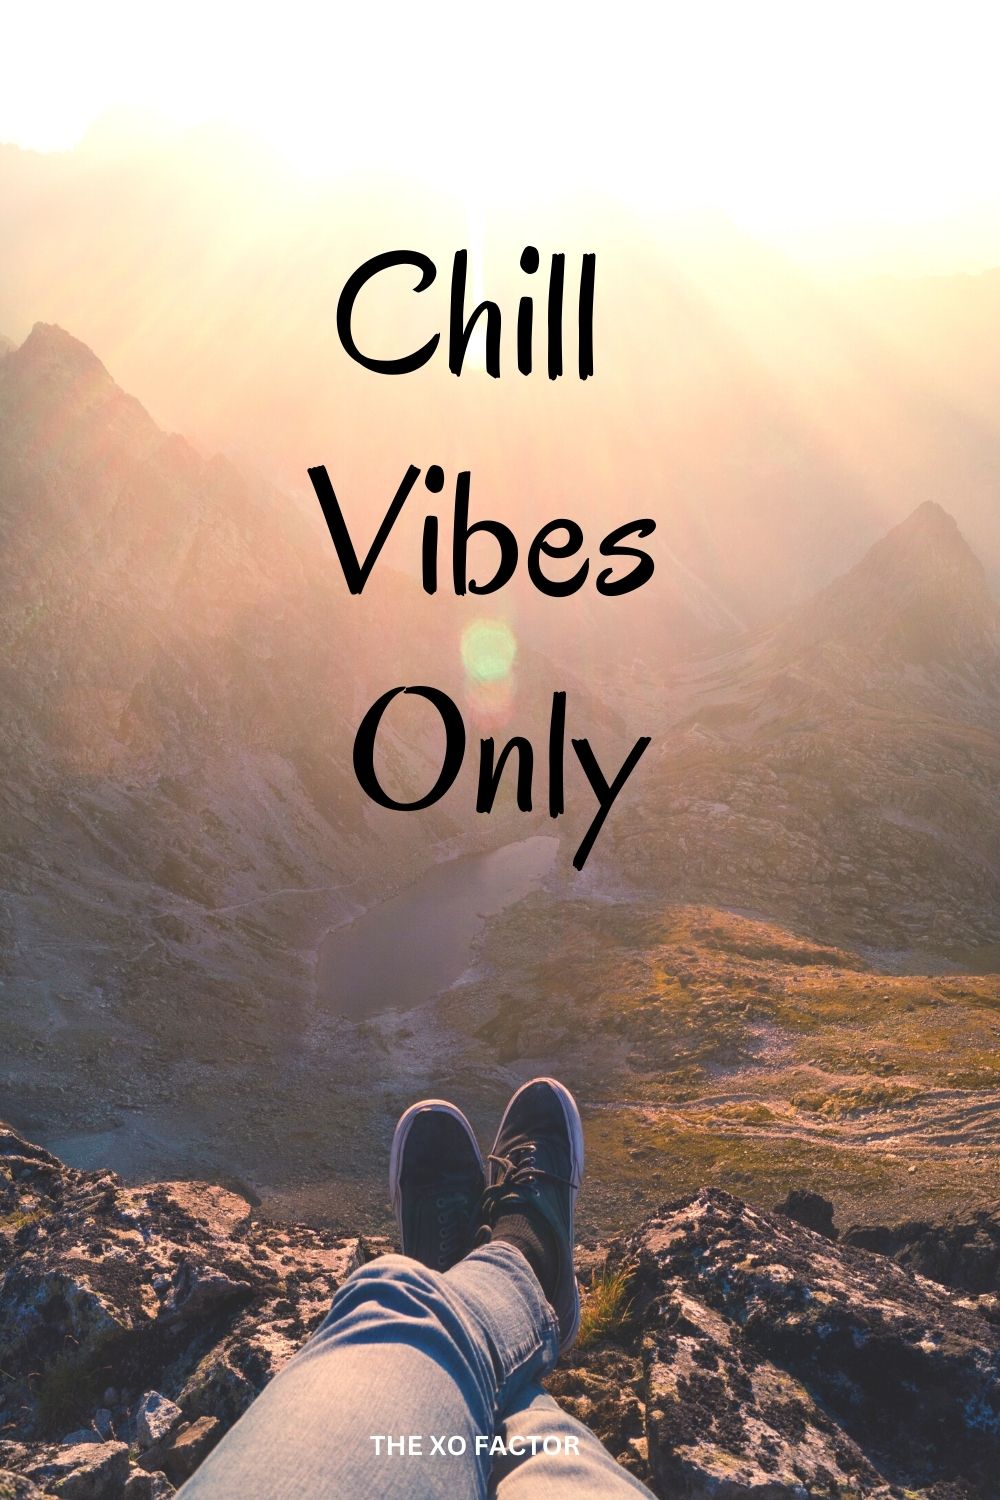 Chill vibes only.